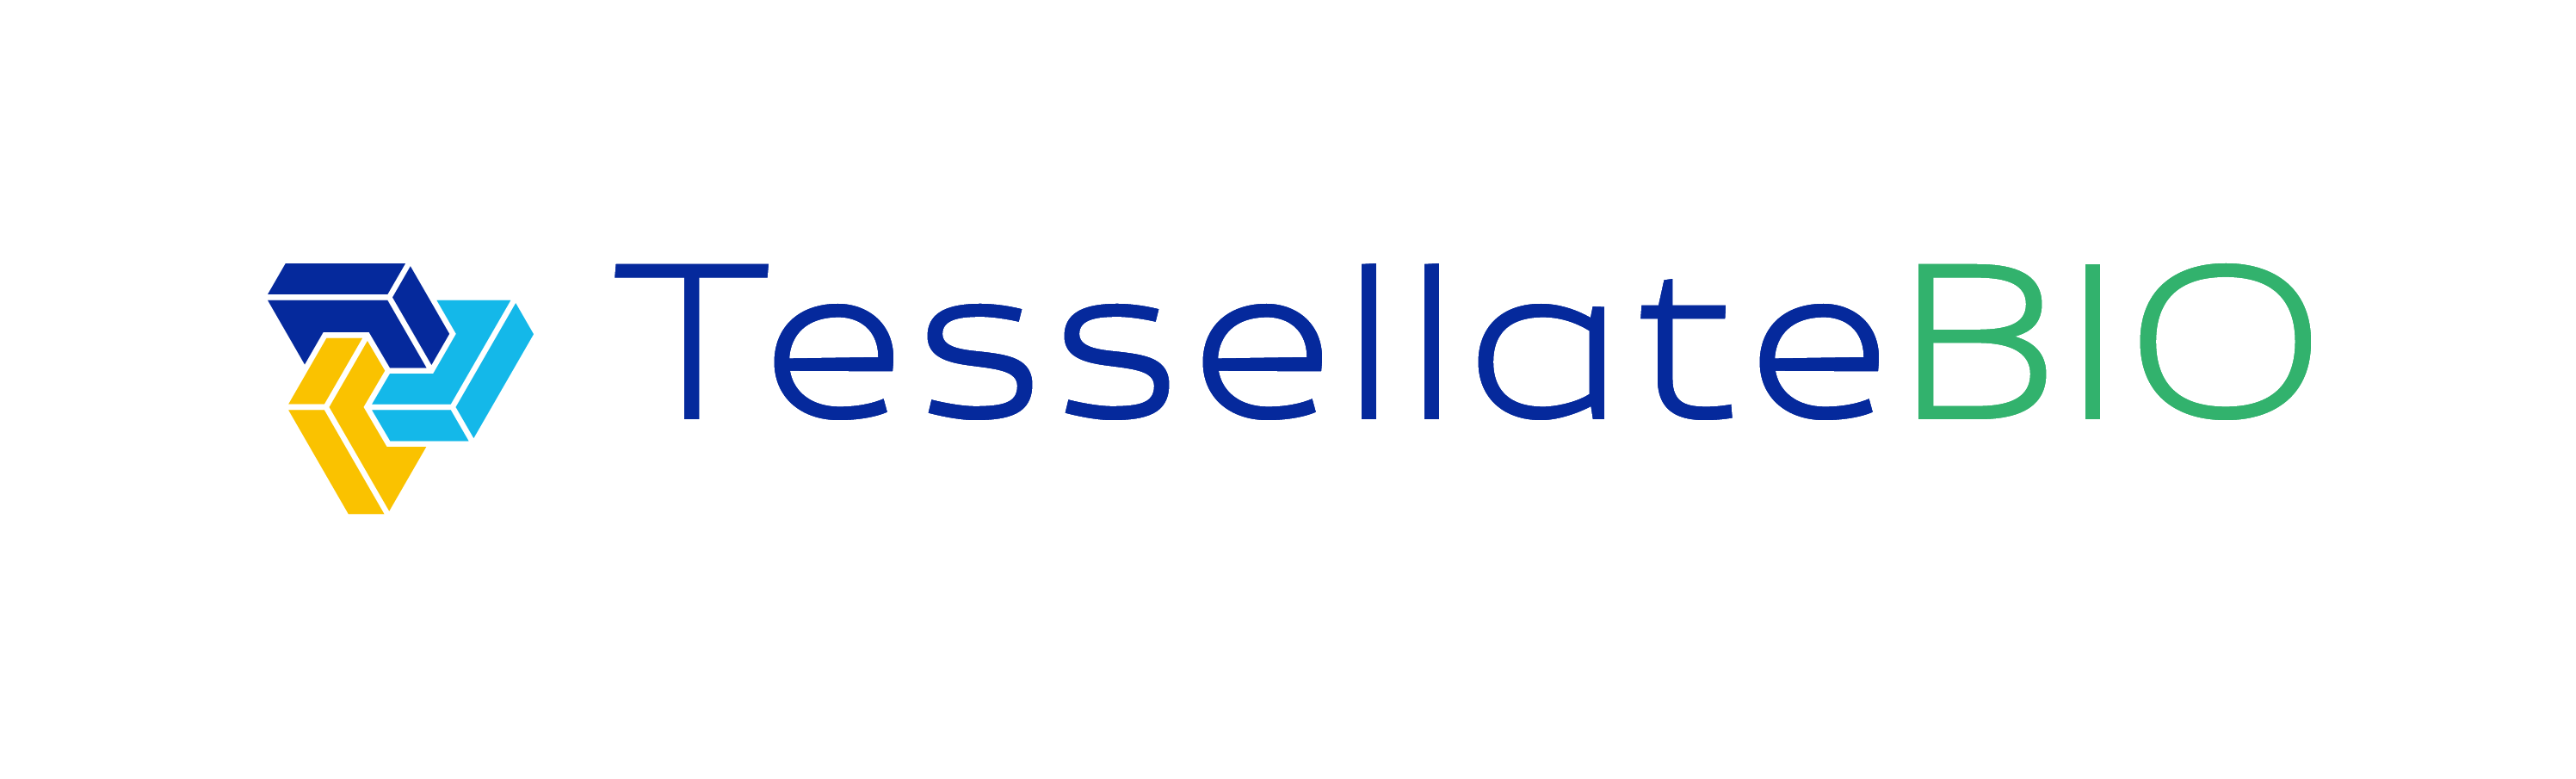 Tessellate BIO, an Emerging Precision Oncology Company, Announces the Appointment of World-Leading Scientists to its Scientific Advisory Board